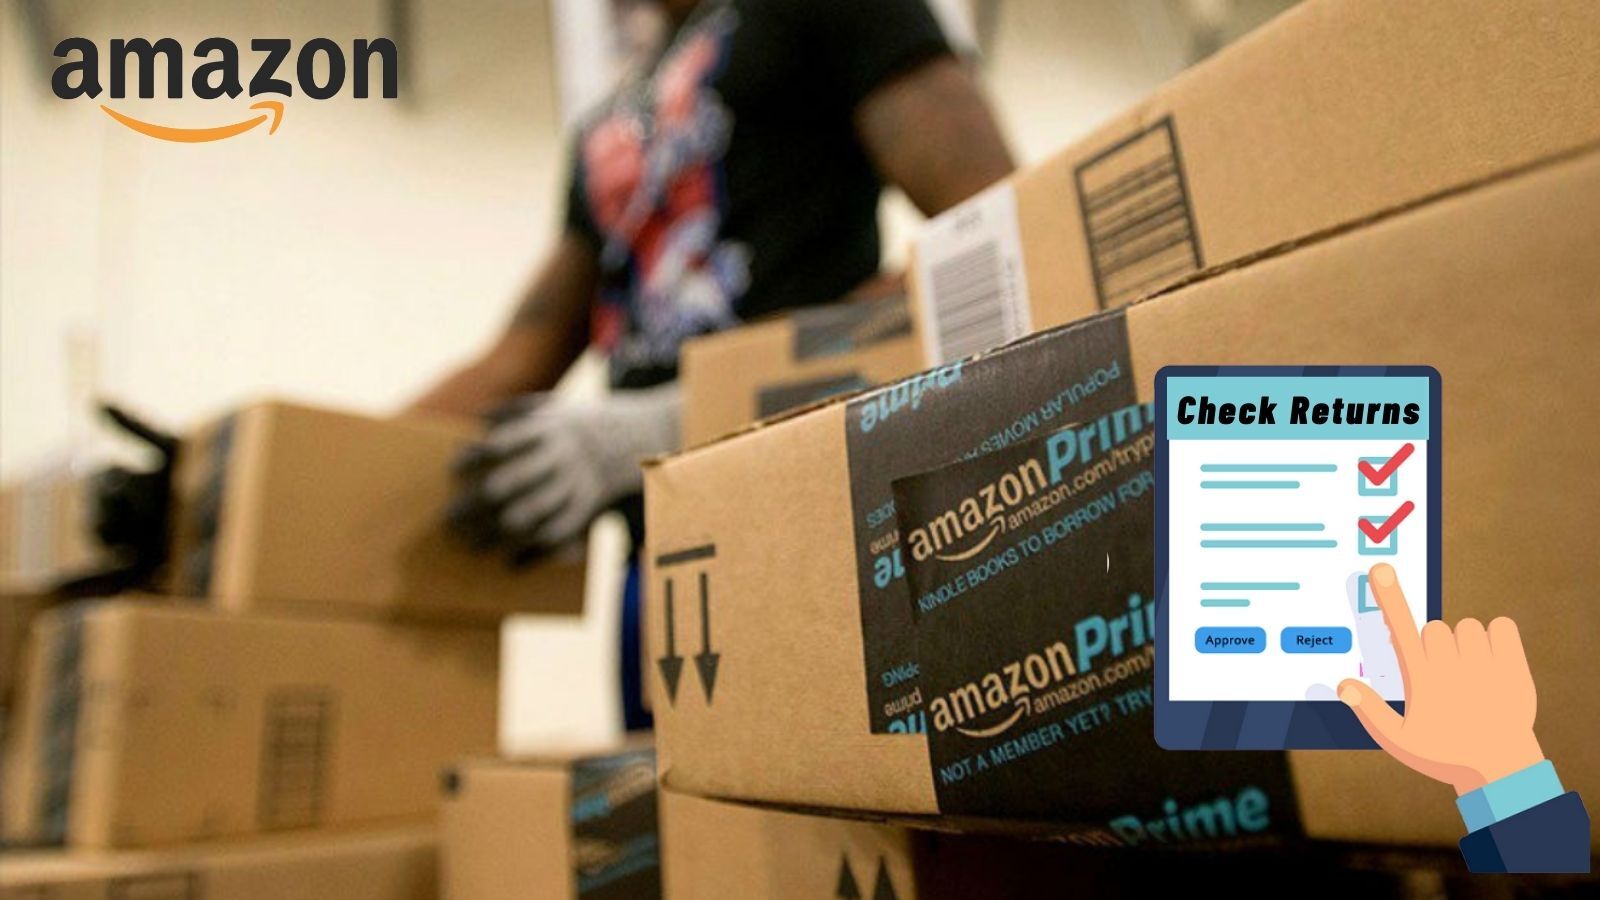 Does Amazon Check Returns? (All You Need to Know)